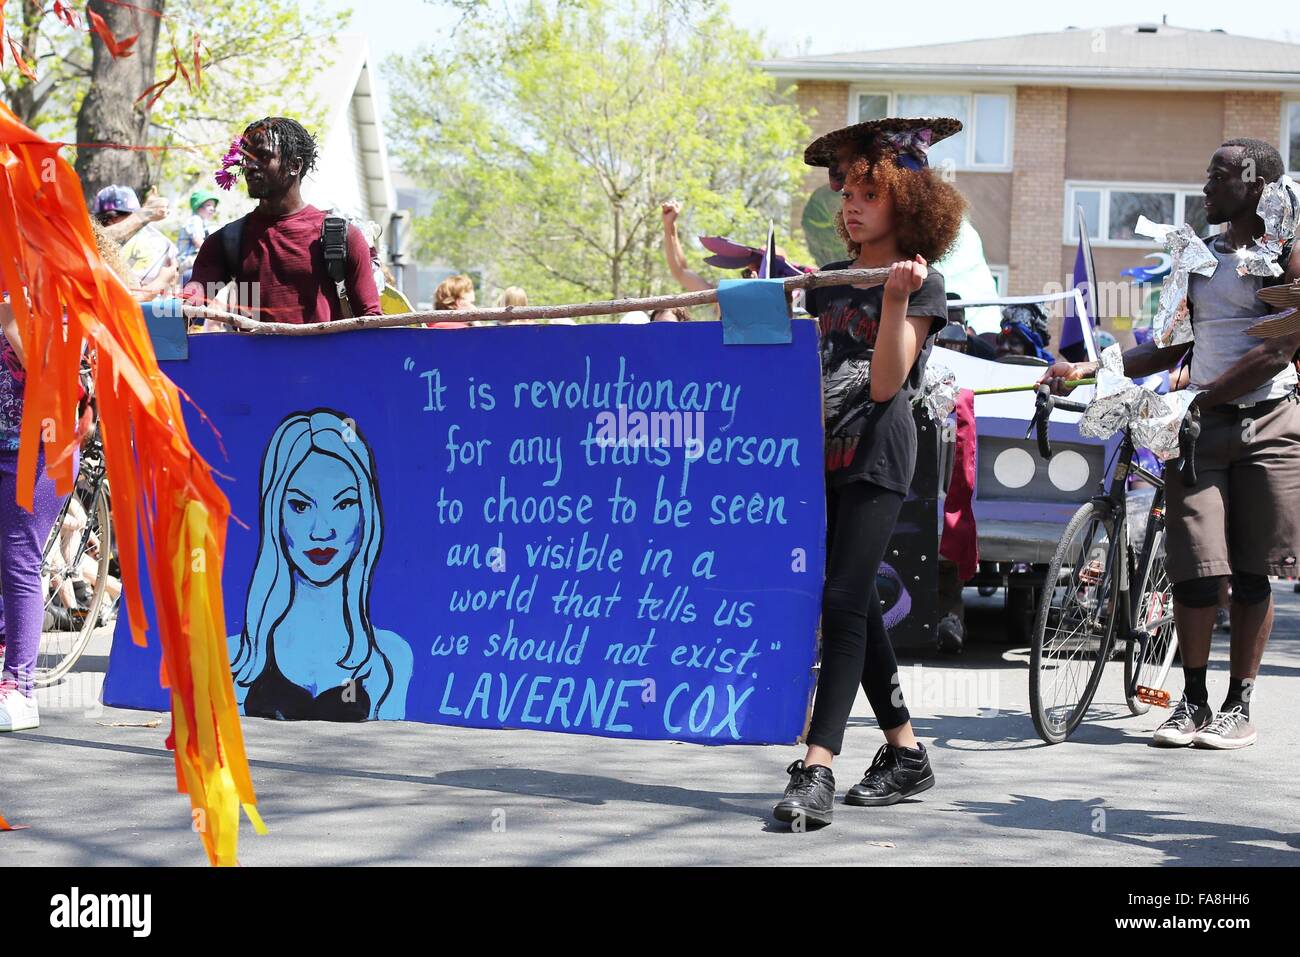 People holding a banner with a quote by Laverne Cox, in support of transgender people in the May Day parade in Minneapolis. Stock Photo